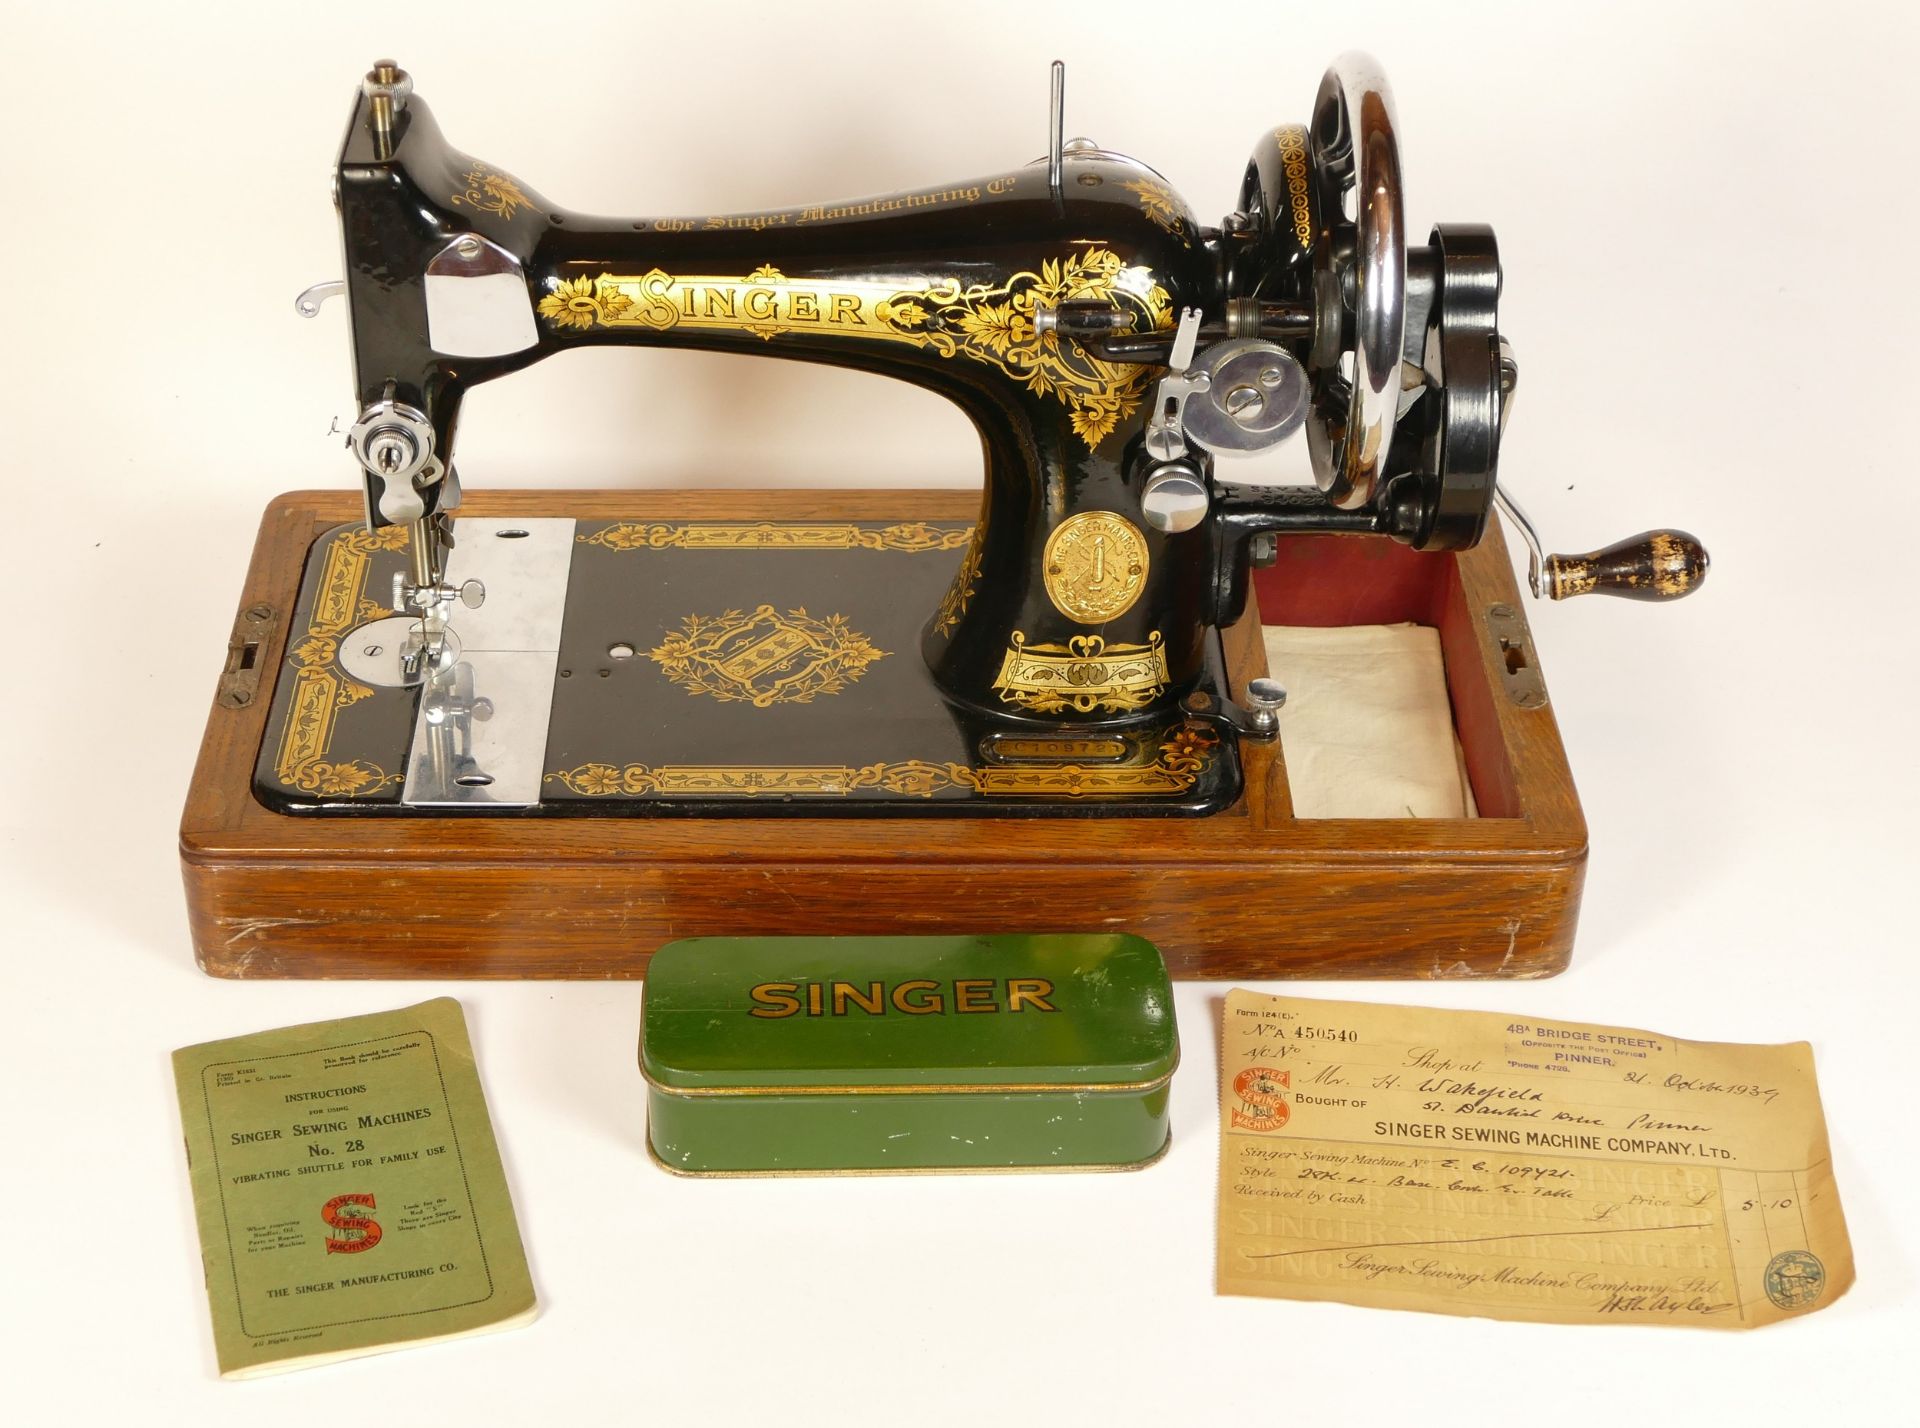 A manual operated Singer sewing machine, circa 1939, model EC109721, cased with key, instructions